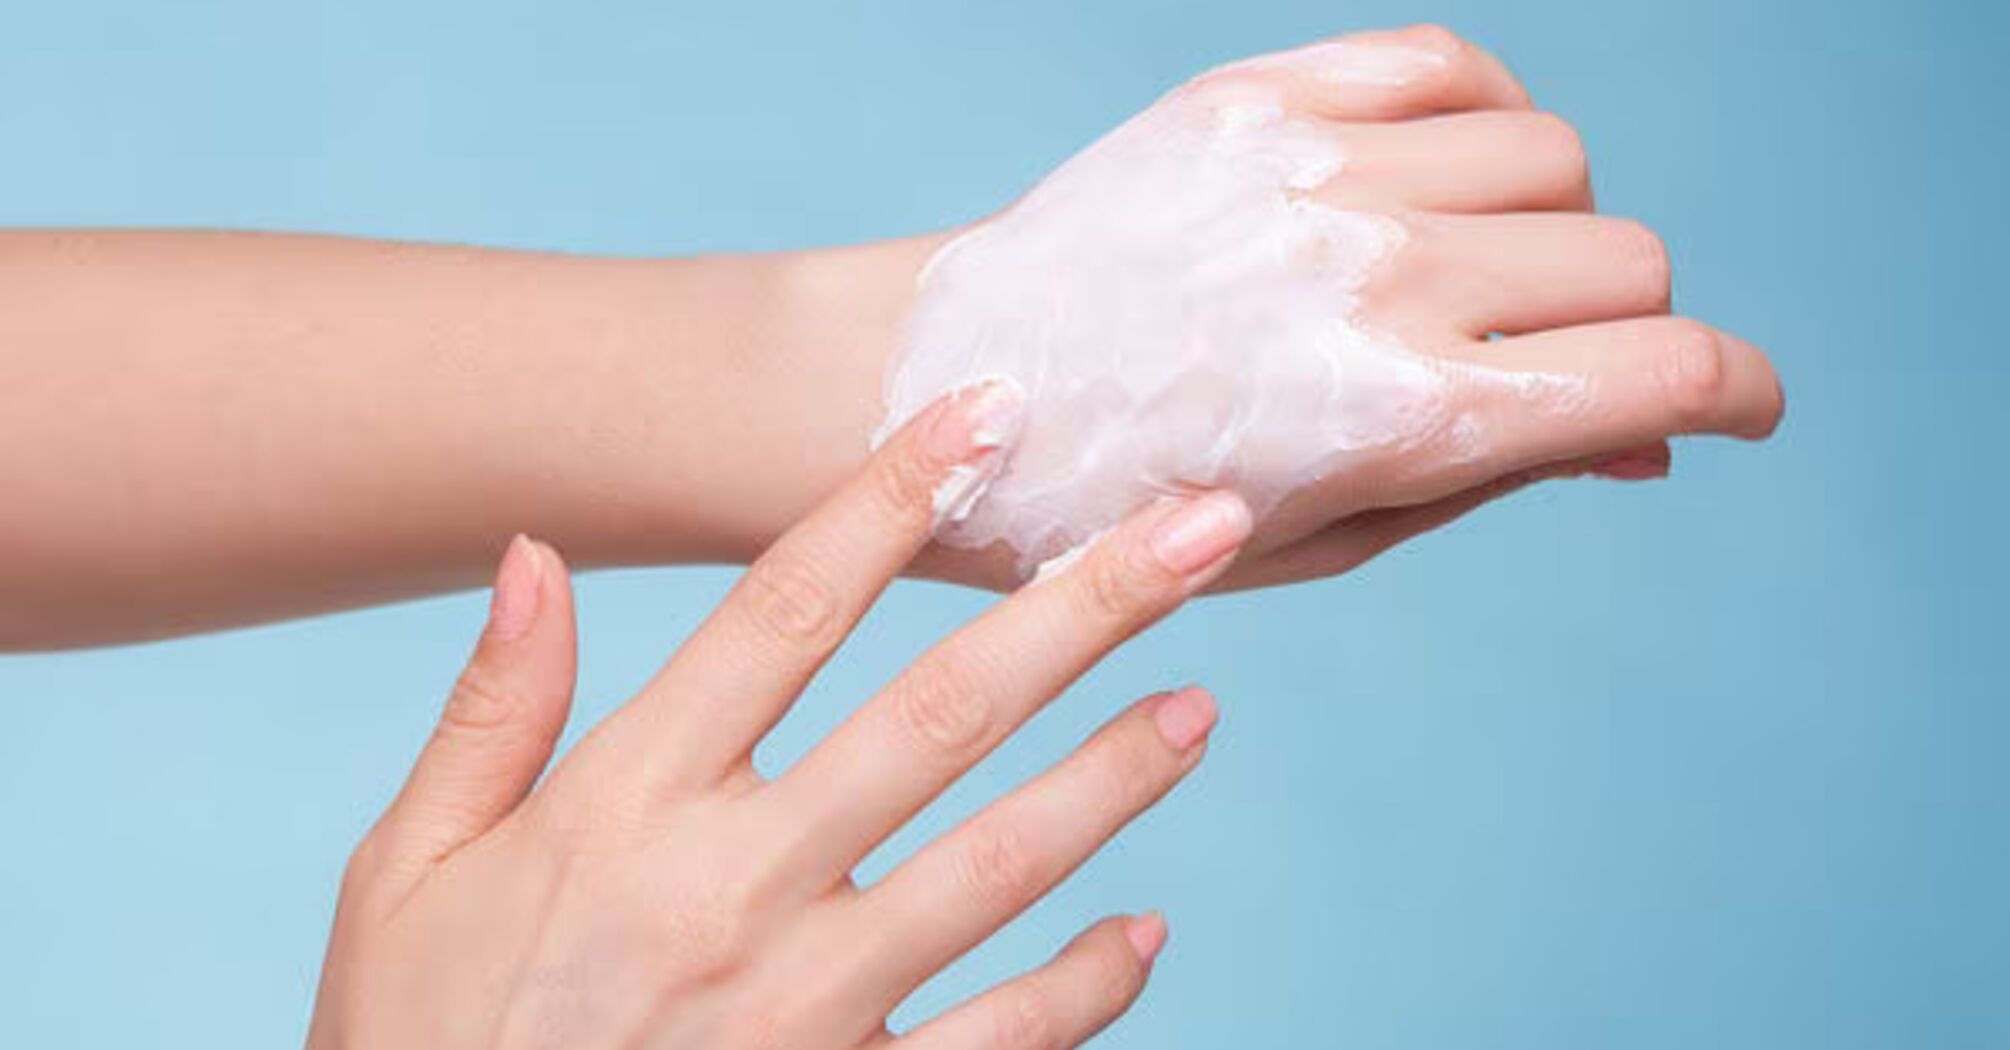 How to get rid of dry skin on your hands